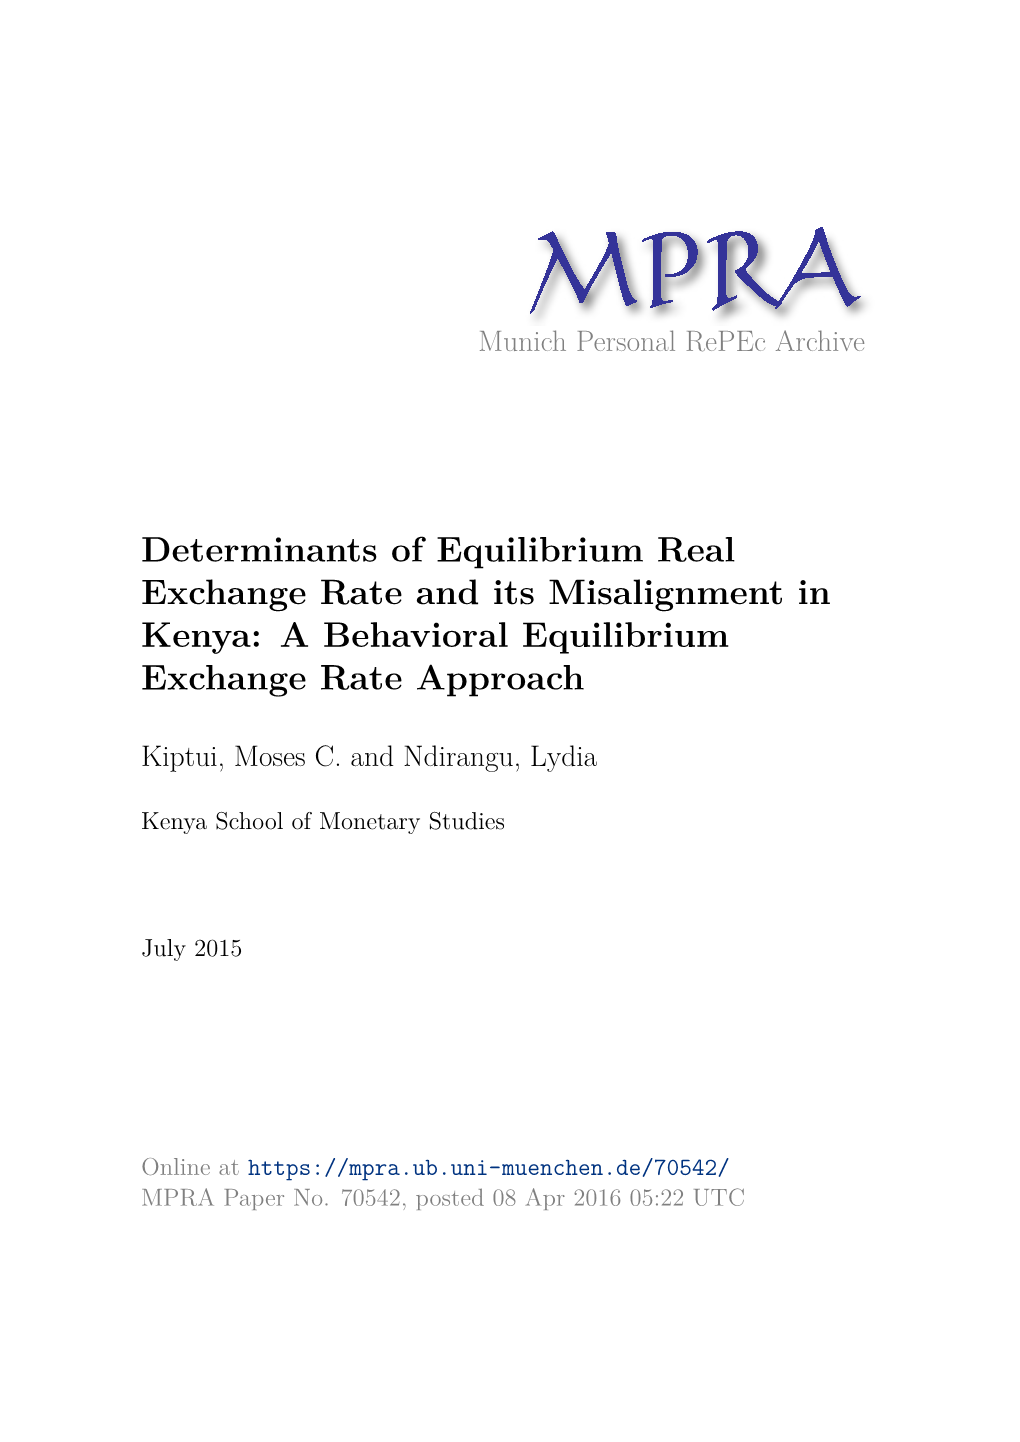 A Behavioral Equilibrium Exchange Rate Approach